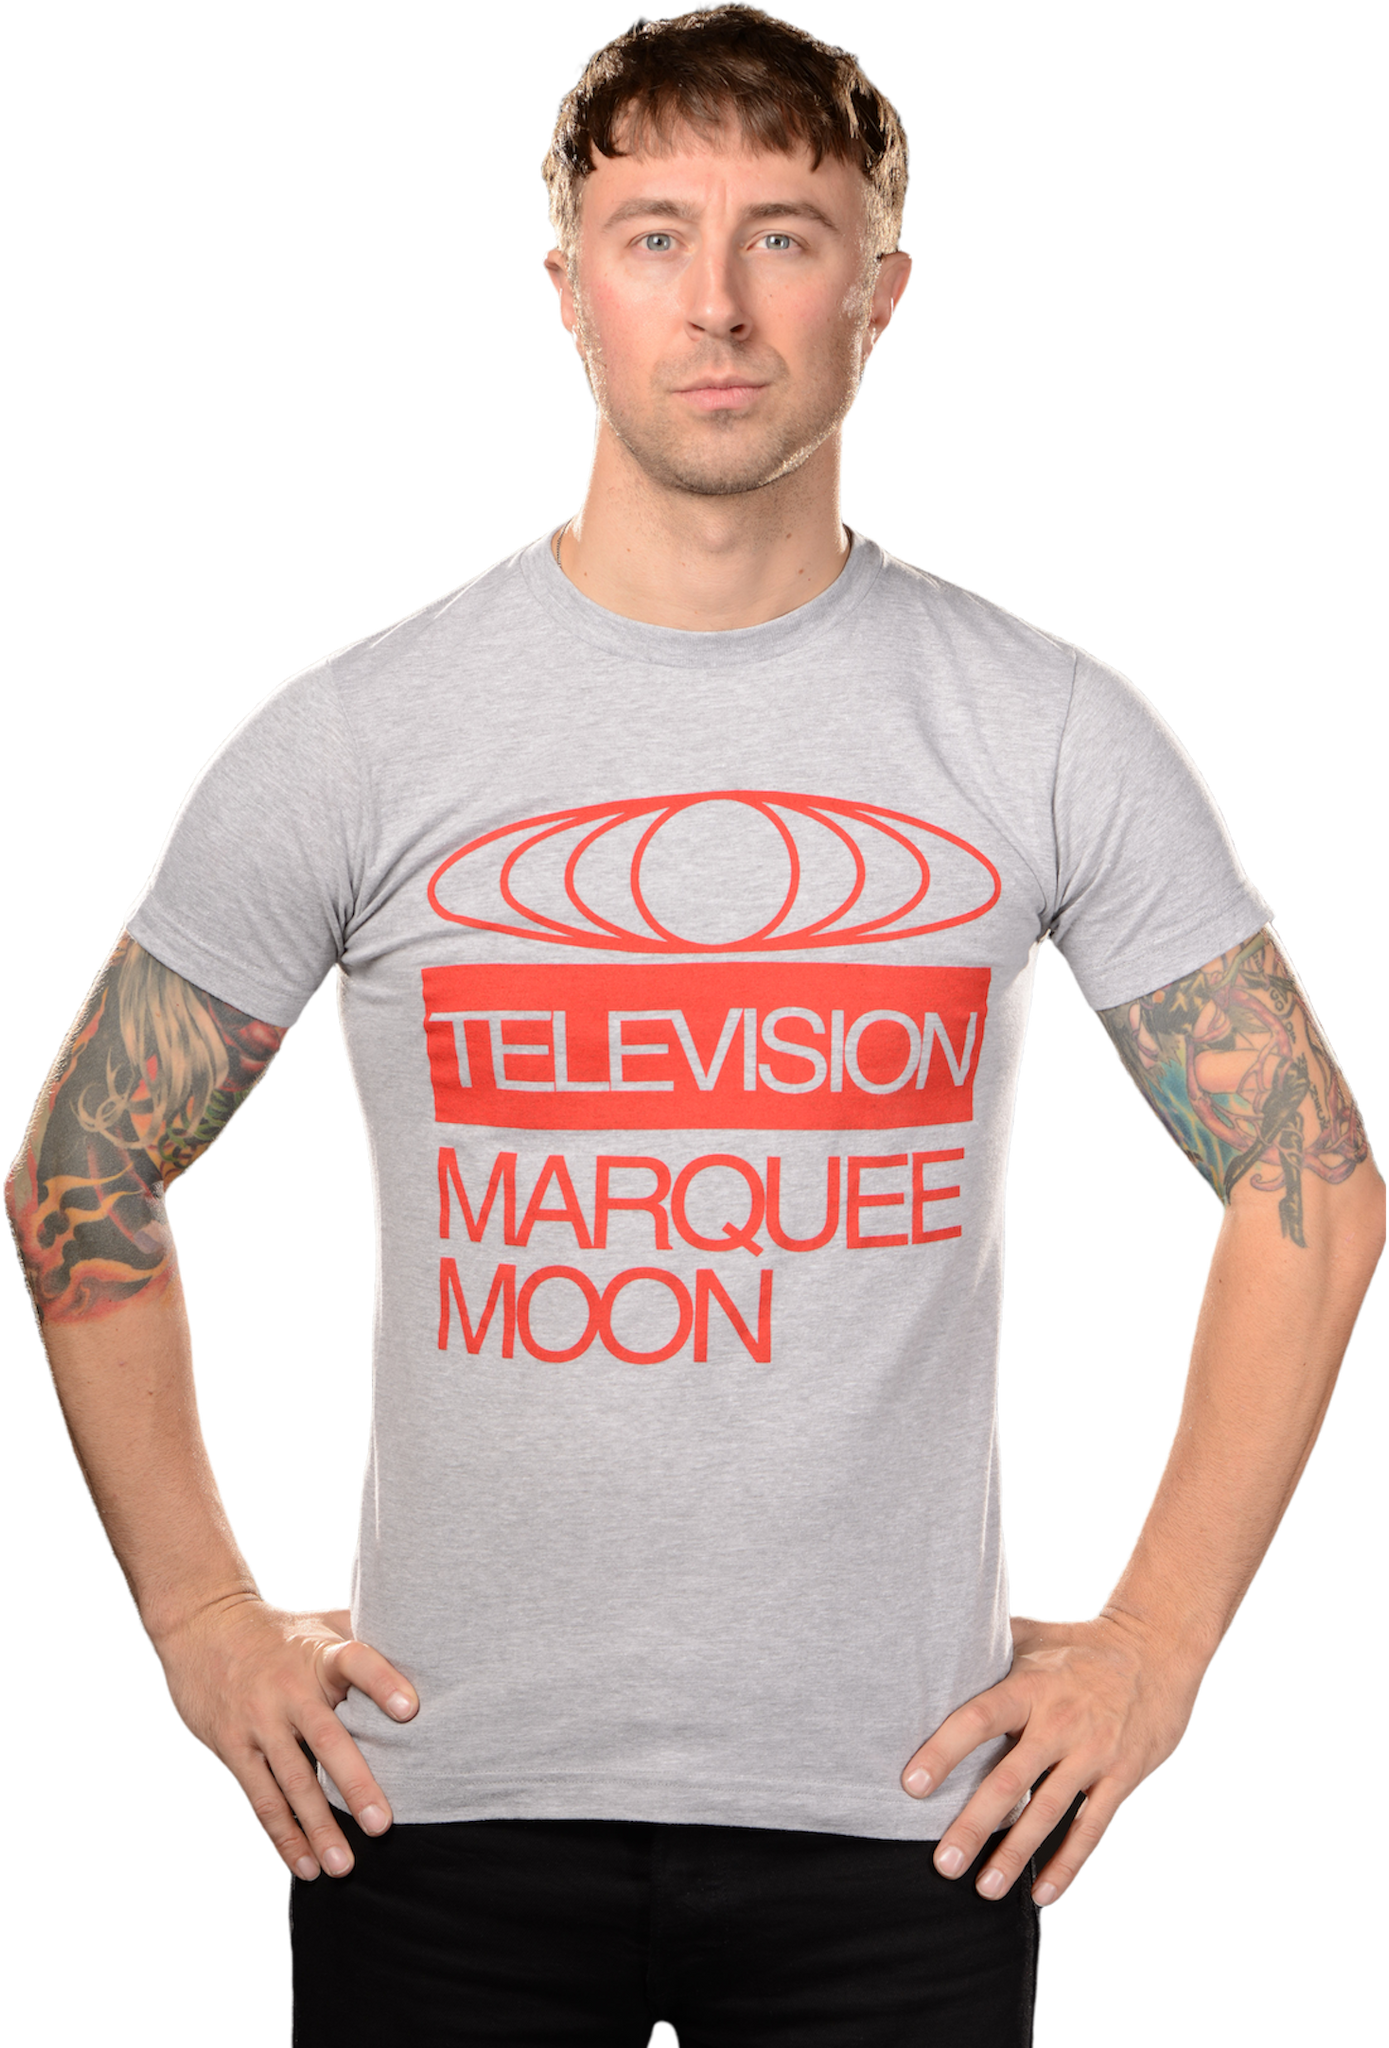 TELEVISION - "MARQUEE MOON" HEATHER GRAY T-SHIRT